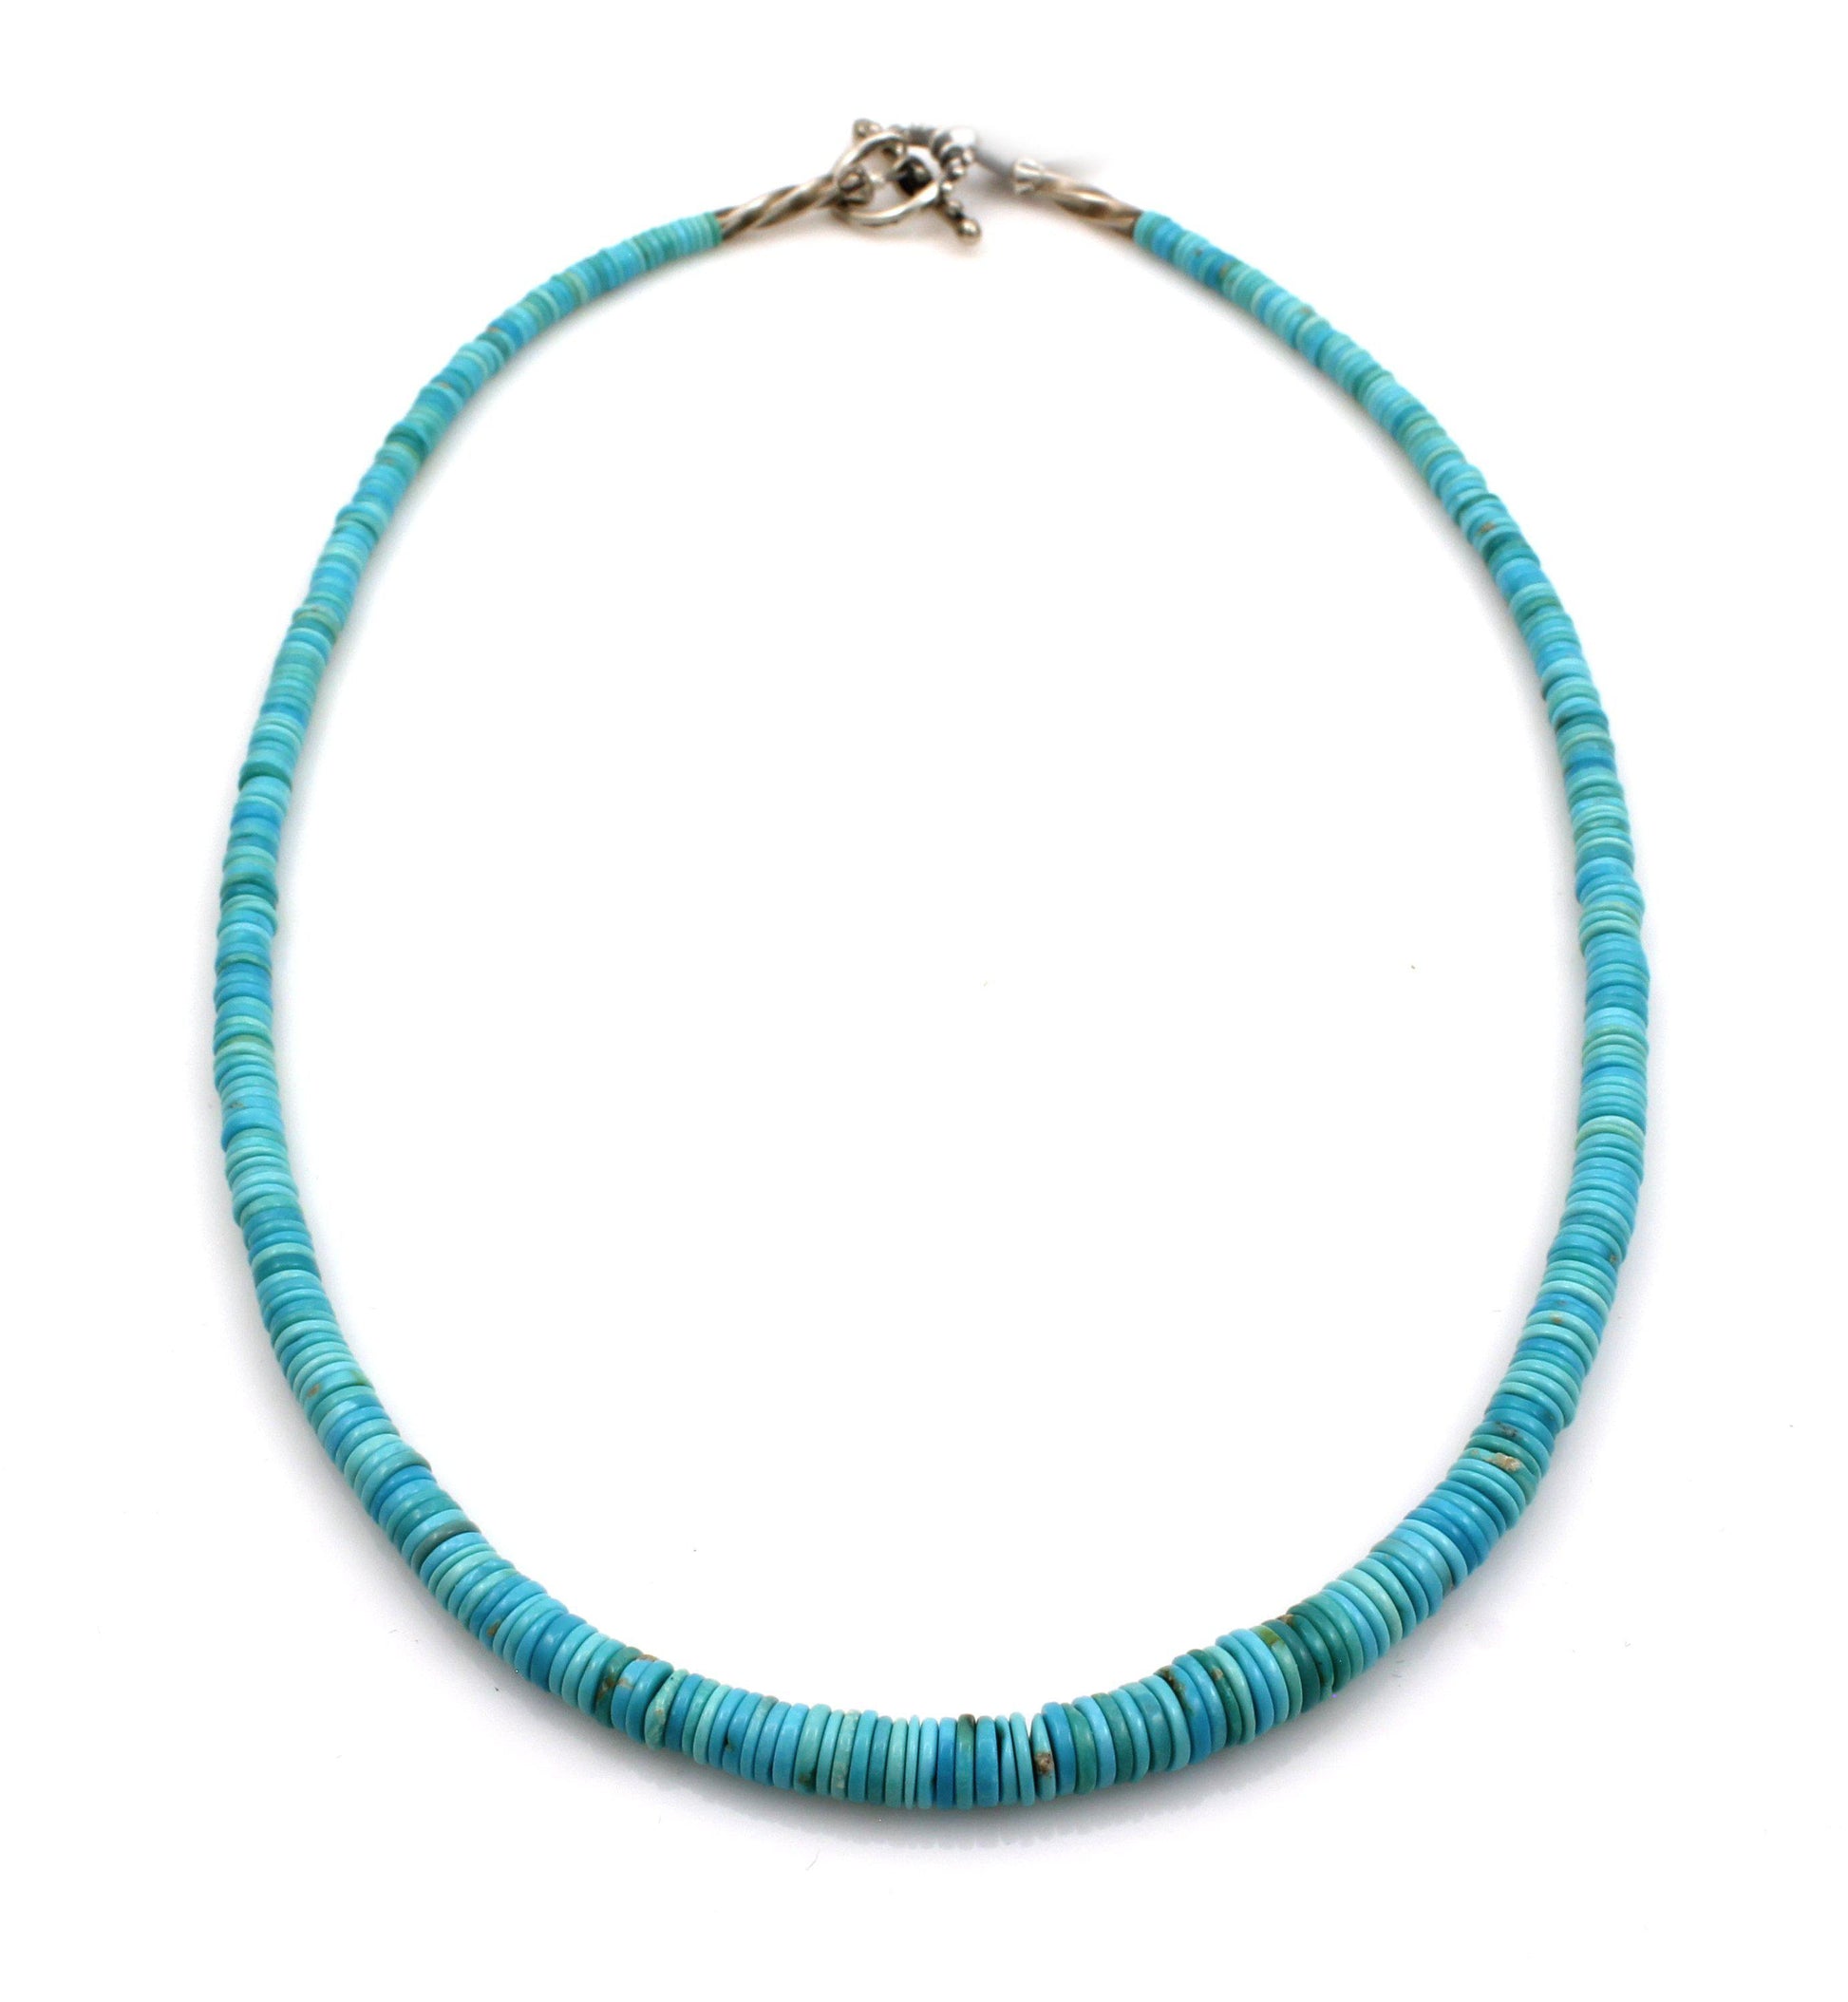 Sleeping Beauty Turquoise Bead Necklace-Jewelry-Pam Springall-Sorrel Sky Gallery